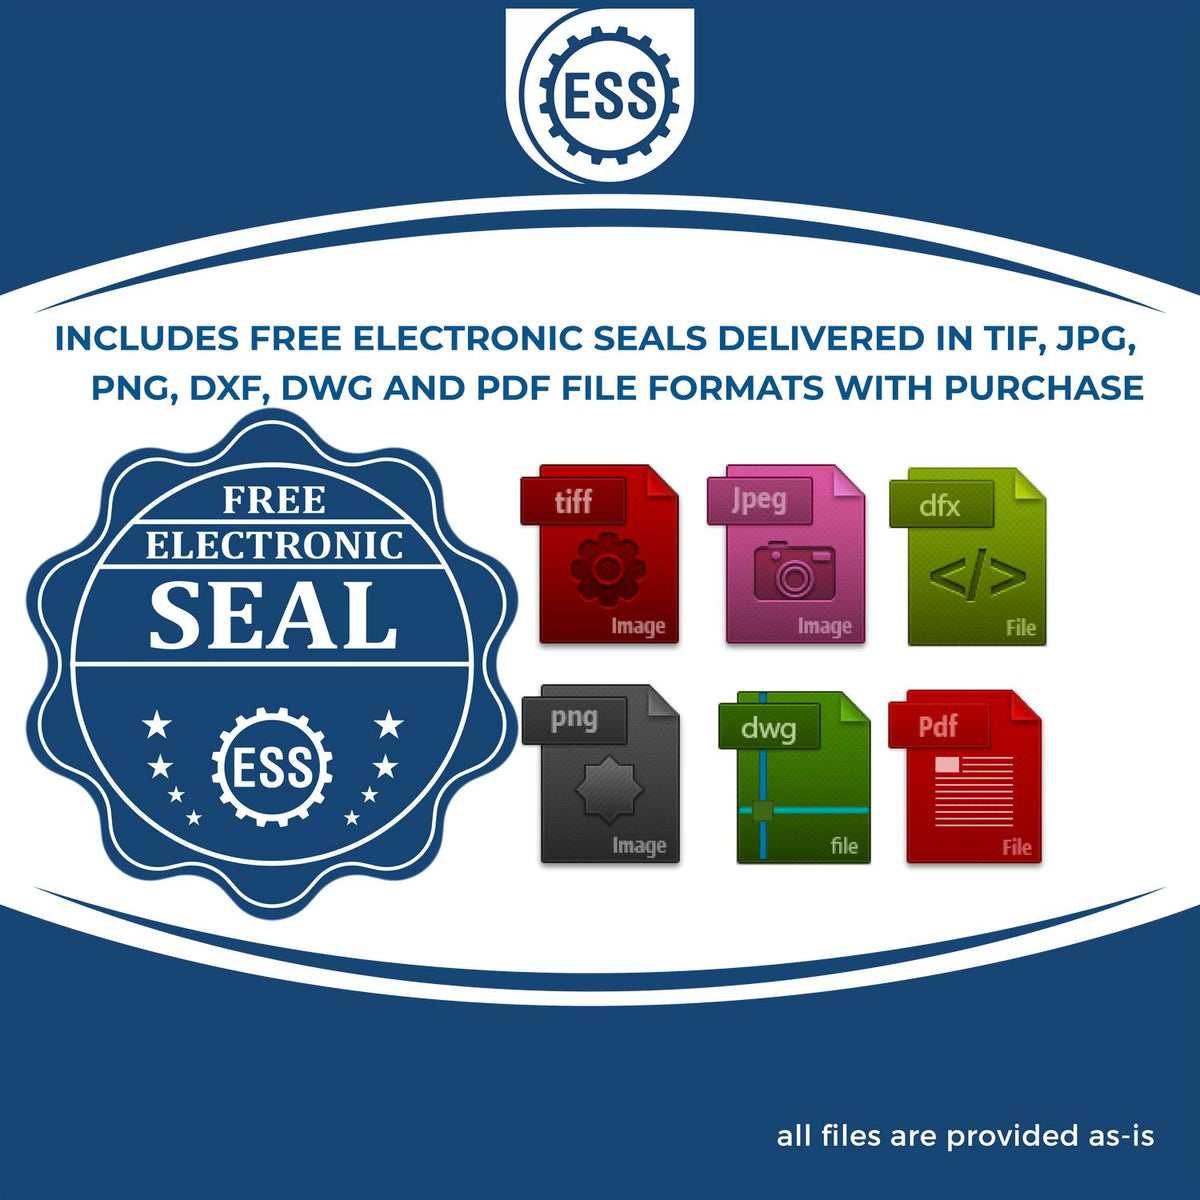 An infographic for the free electronic seal for the Heavy Duty Cast Iron Maryland Engineer Seal Embosser illustrating the different file type icons such as DXF, DWG, TIF, JPG and PNG.